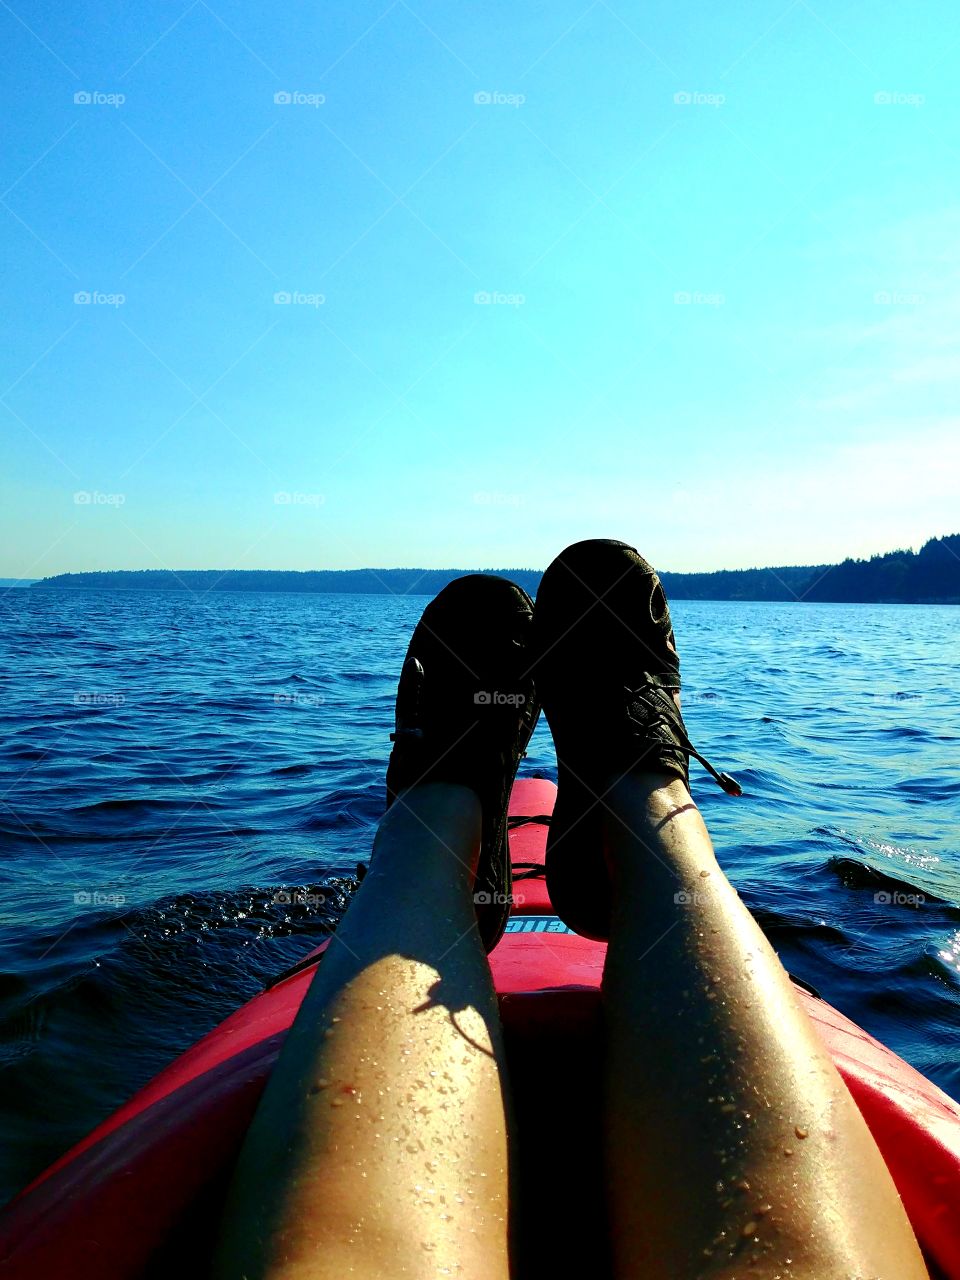 chilling out with my feet up on the water.